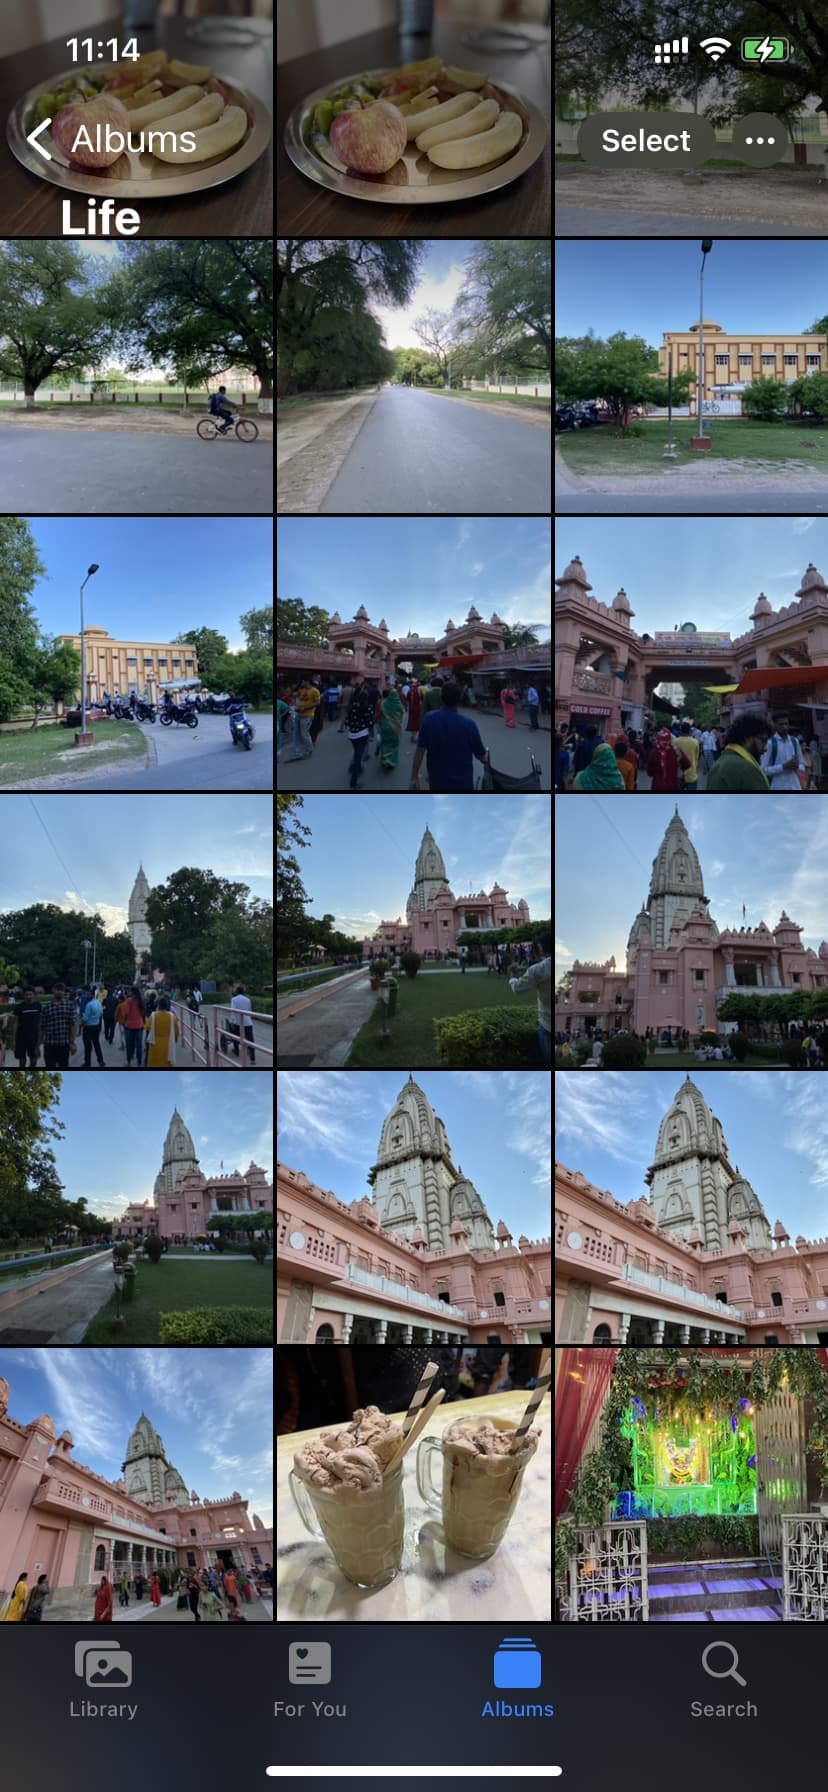 iPhone Photos app showing several images of a famous temple